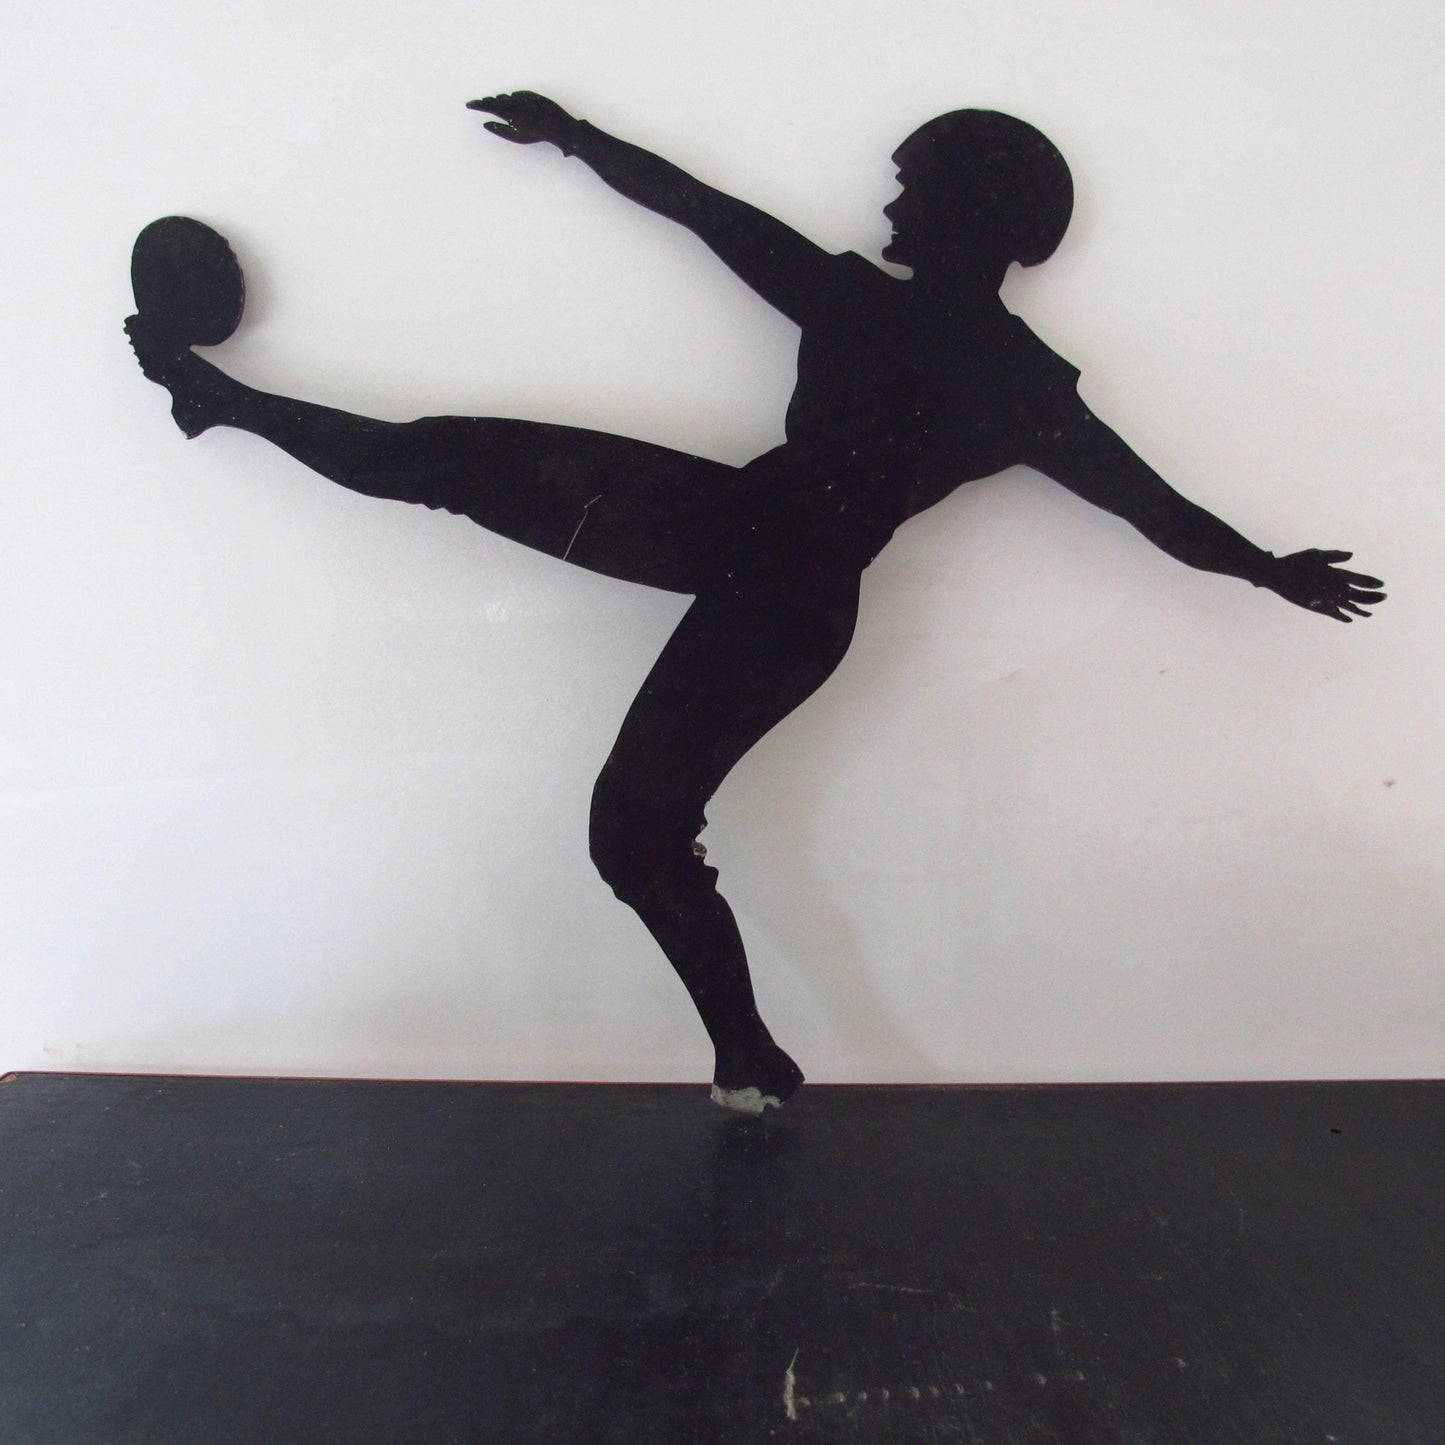 Football Player Kickoff Cut Metal Silhouette 1930s Kicking Antique Sign